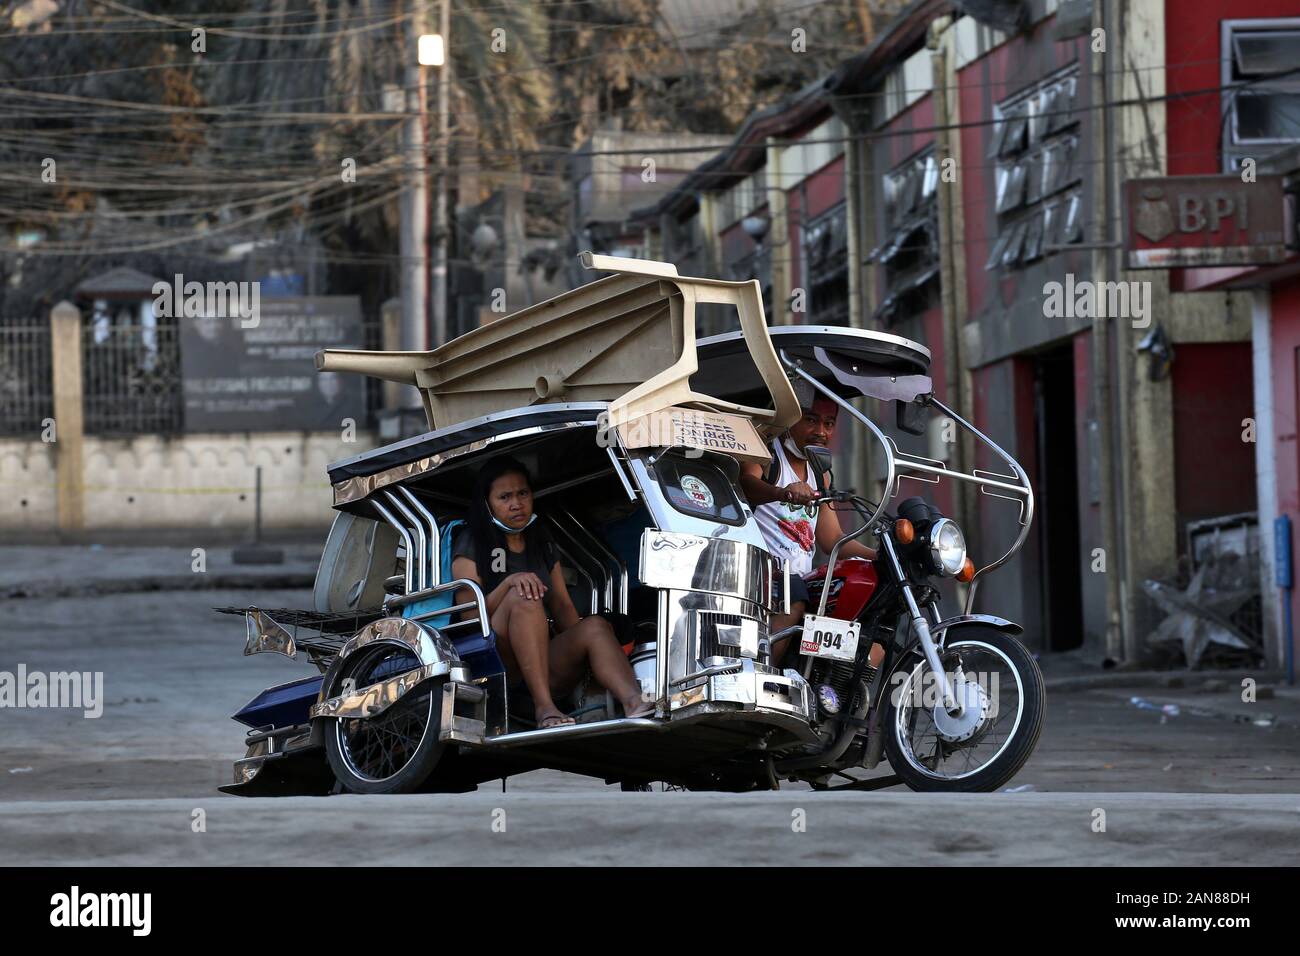 Talisay, Philippines. 16th Jan, 2020. A married couple transports their belongings on a tricycle in Talisay, in the province of Batangas. The Taal volcano lost some activity on Thursday, the fifth day of eruption, but the risk of a dangerous lava eruption remains, according to the Philippine Institute of Volcanology and Seismology (Phivolcs). Around 70,000 people are being evacuated in the provinces of Batangas and Cavite because it is still not safe to stay in the 14-kilometre danger zone around the Taal. Credit: Alejandro Ernesto/dpa/Alamy Live News Stock Photo